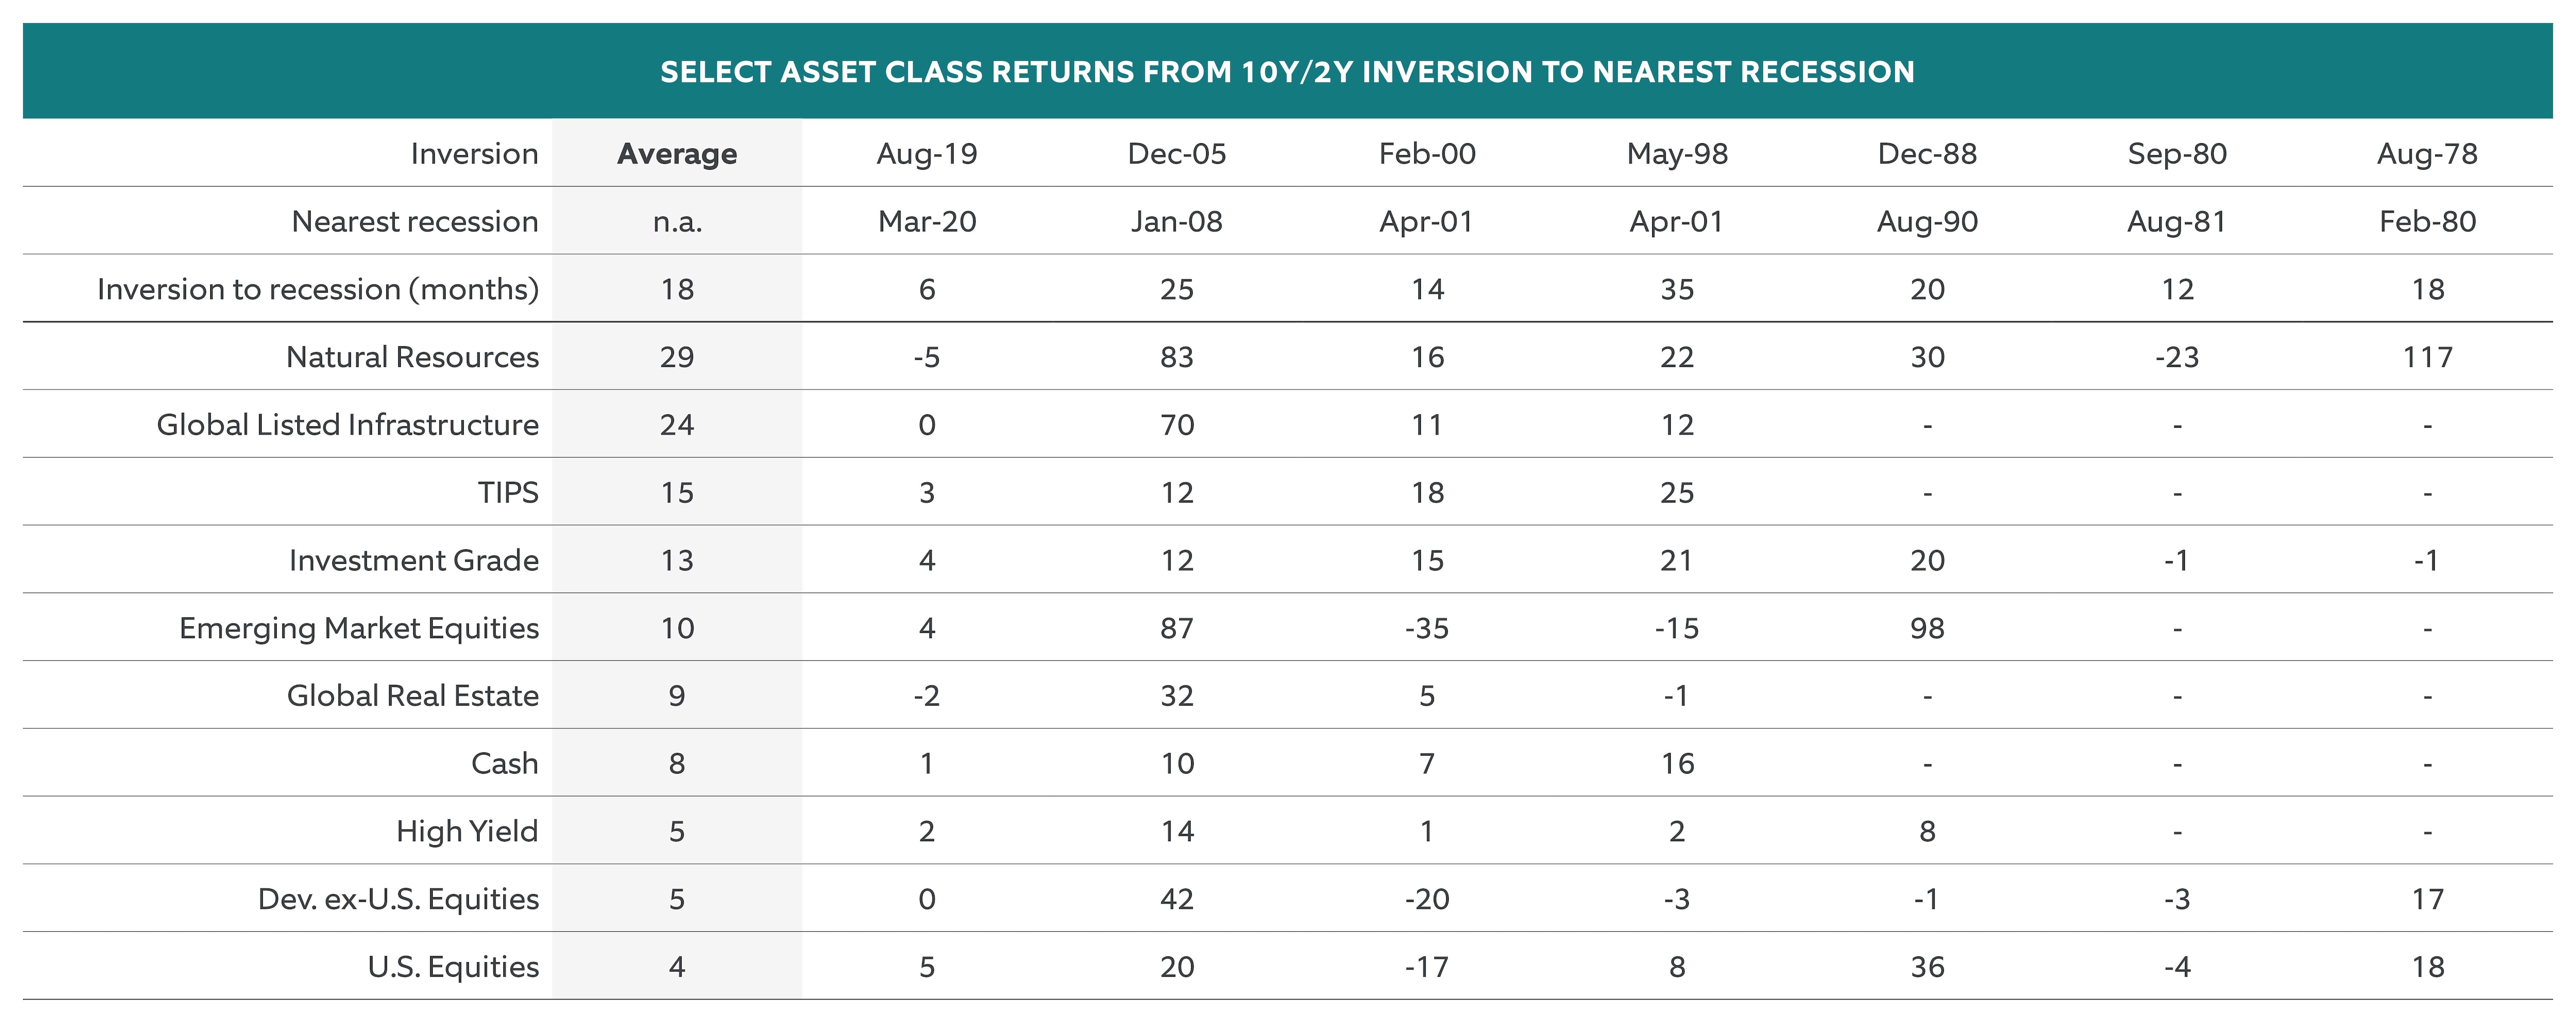 SELECT ASSET CLASS RETURNS FROM 10Y/2Y INVERSION TO NEAREST RECESSION